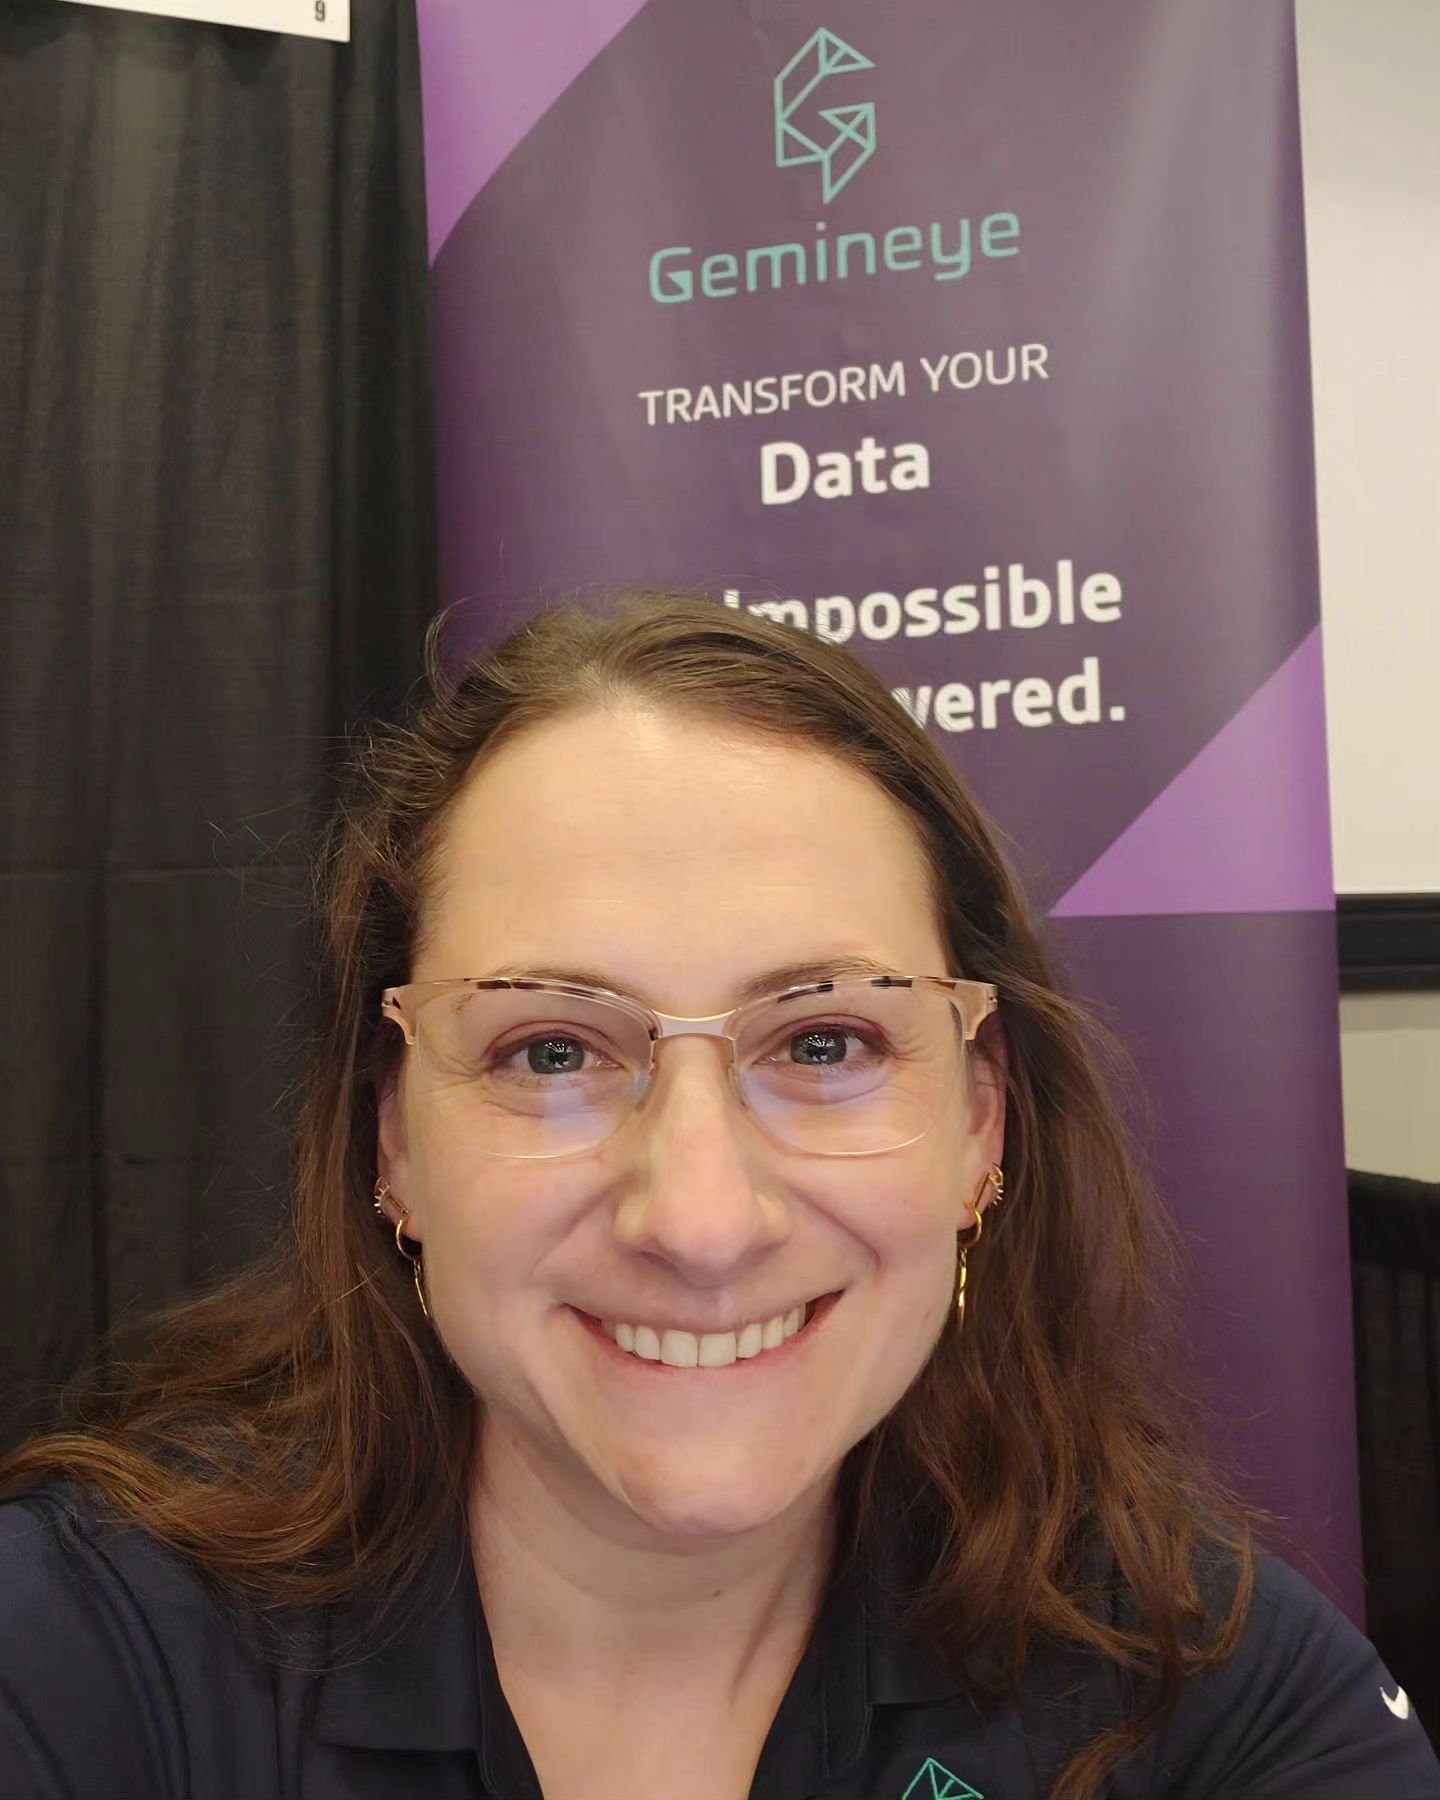 Just an art kid hanging with all the smart techy people at the @jackhenry_fintech @symitarpsc conference, representing data analytics disrupter Gemineye. 

It's a real honor to be representing a company that is working to help #creditunions do more g